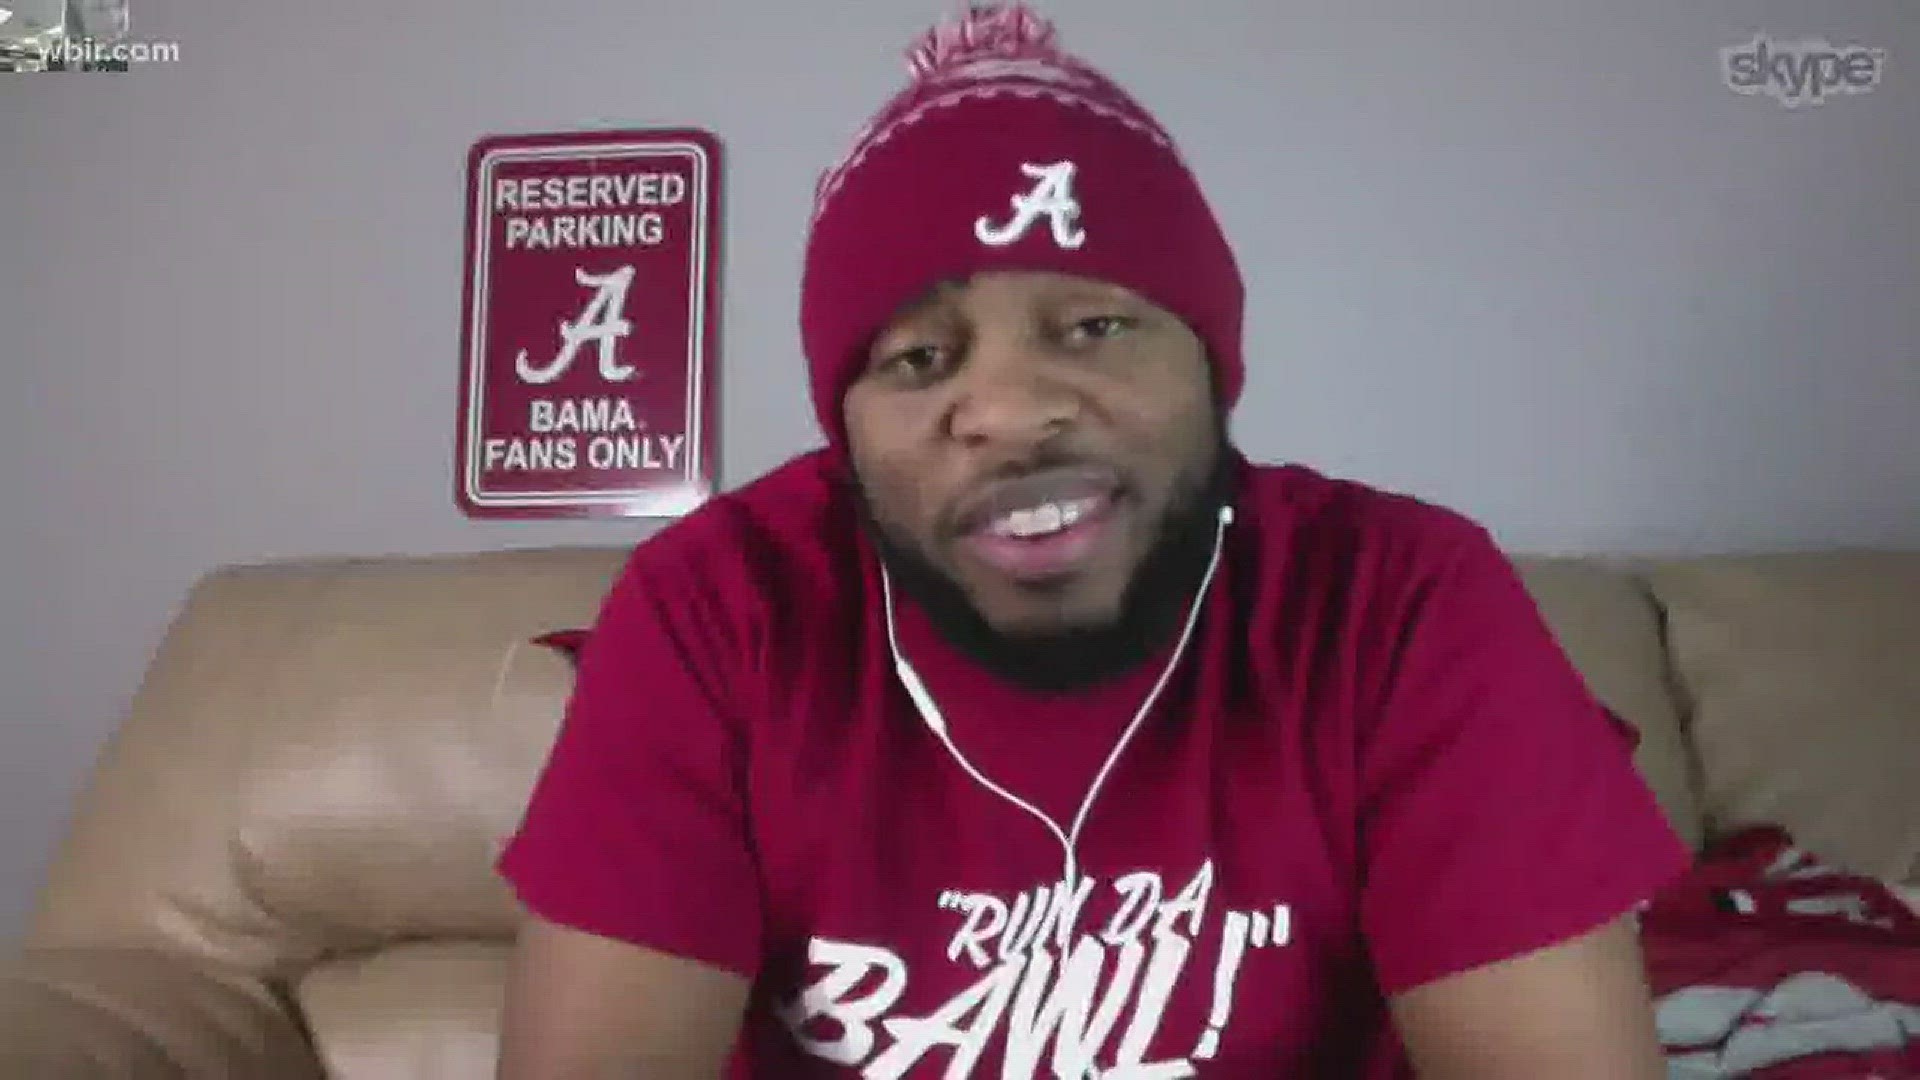 Jermaine "Funny Maine" Johnson, an Alabama fan who is posts comedic videos supporting the Crimson Tide, talks about losing Pruitt to Tennessee.